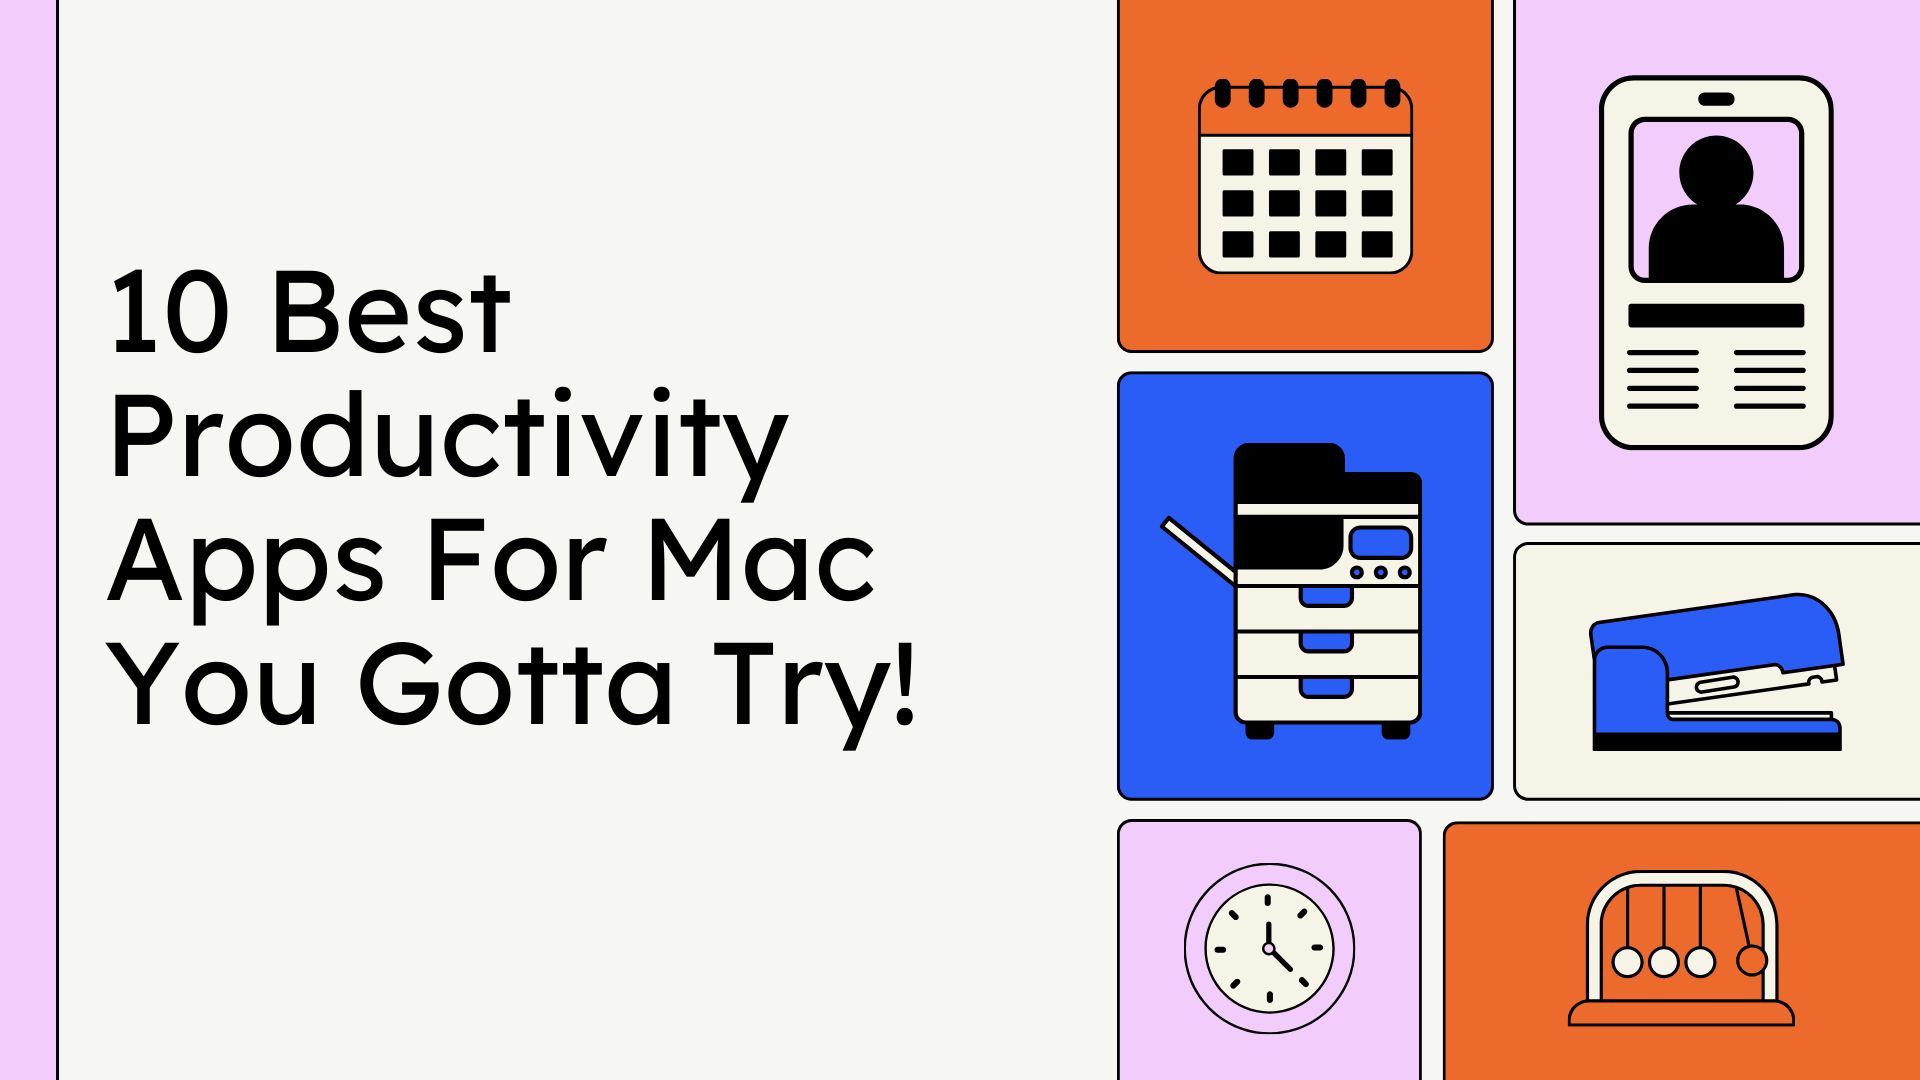 10 Best Productivity Apps For Mac You Gotta Try!